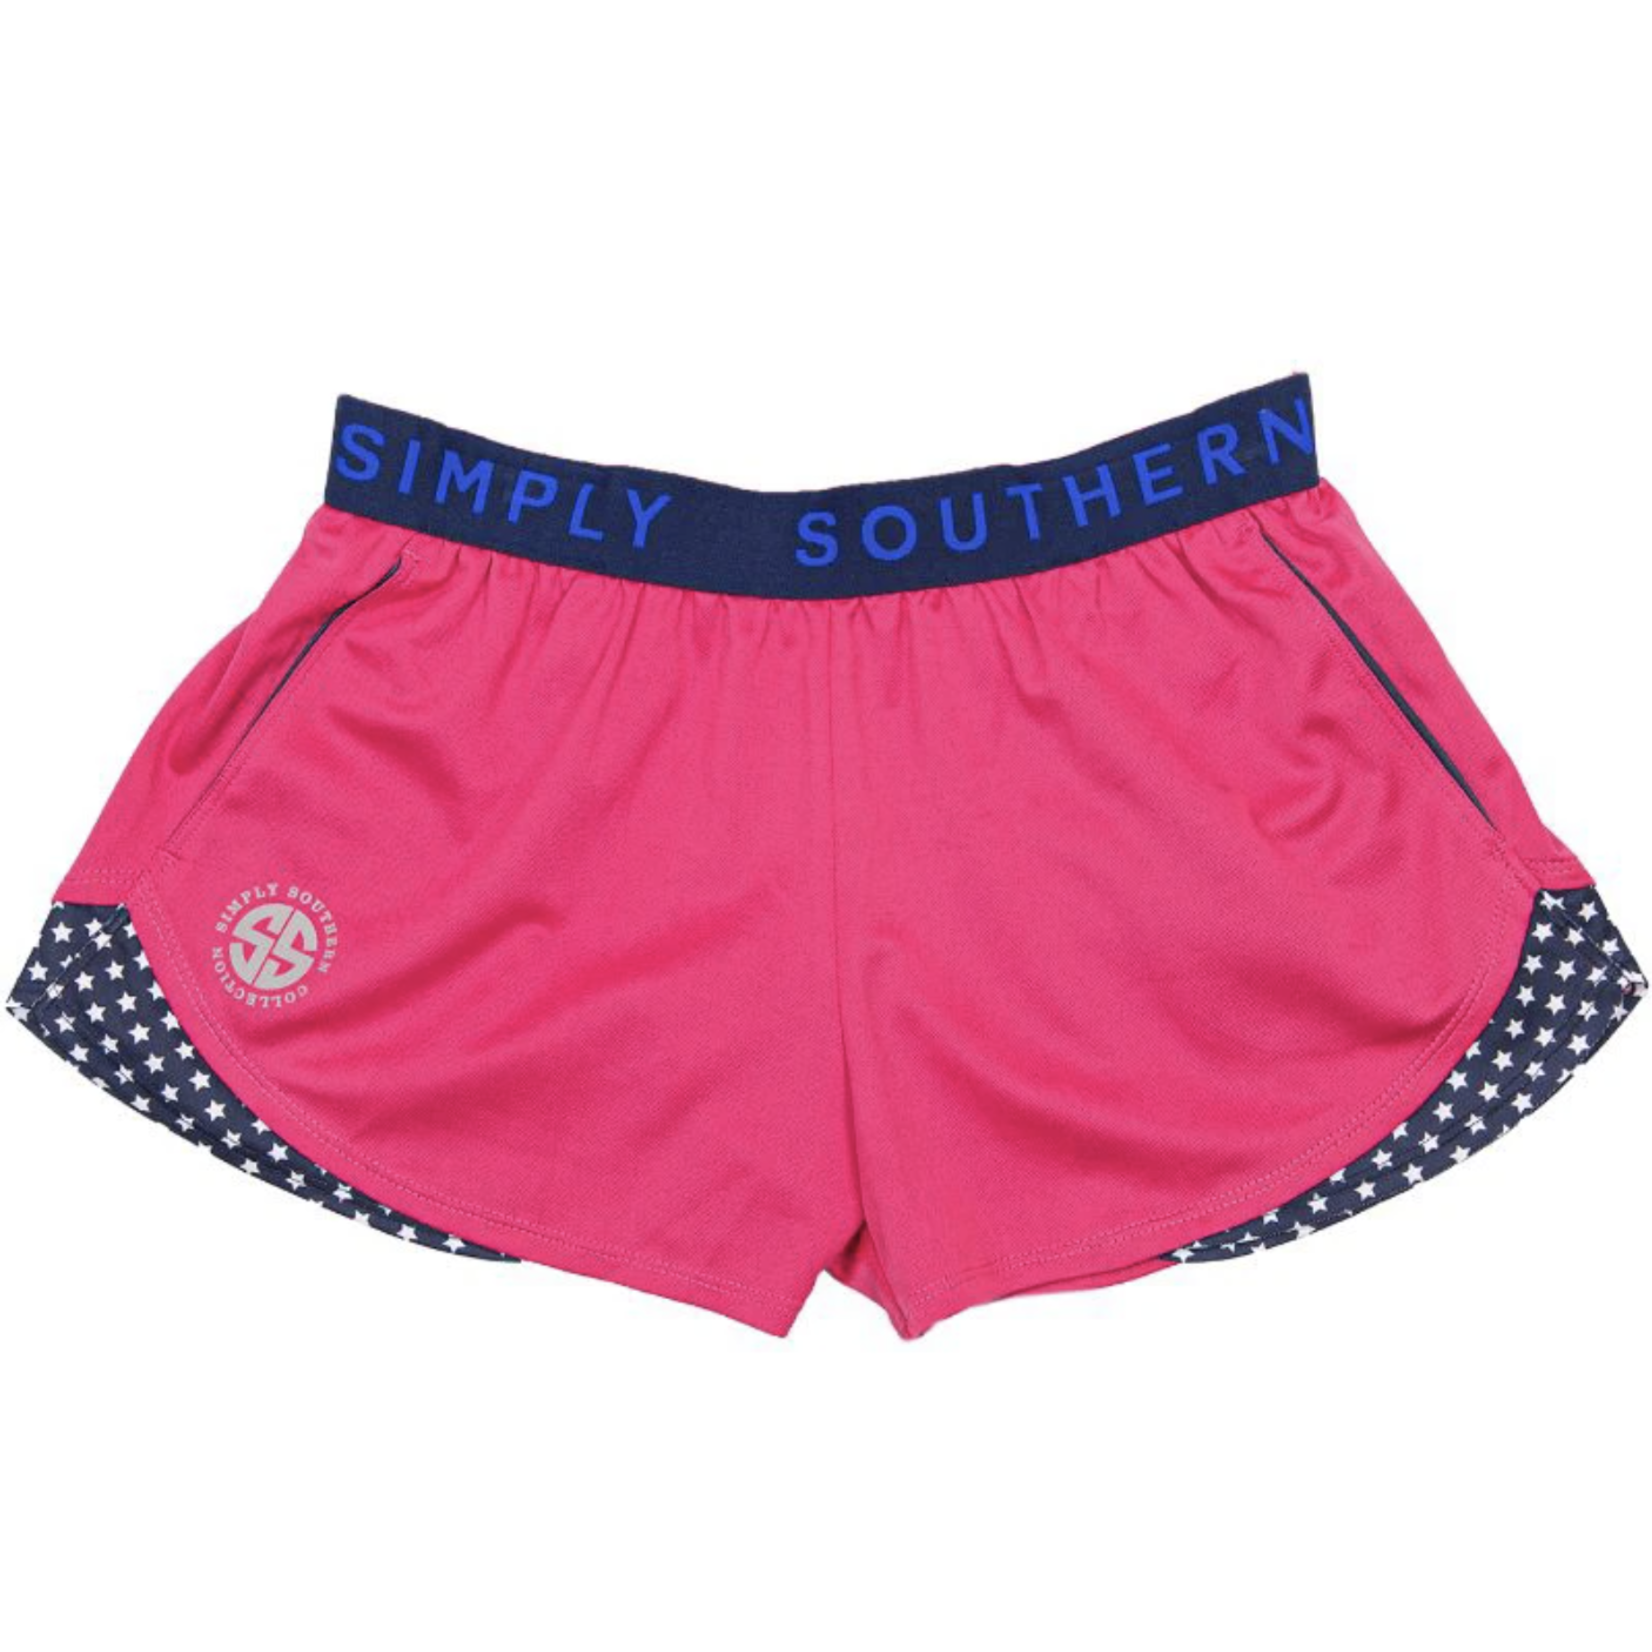 Simply Southern SS Starry Cheer Shorts